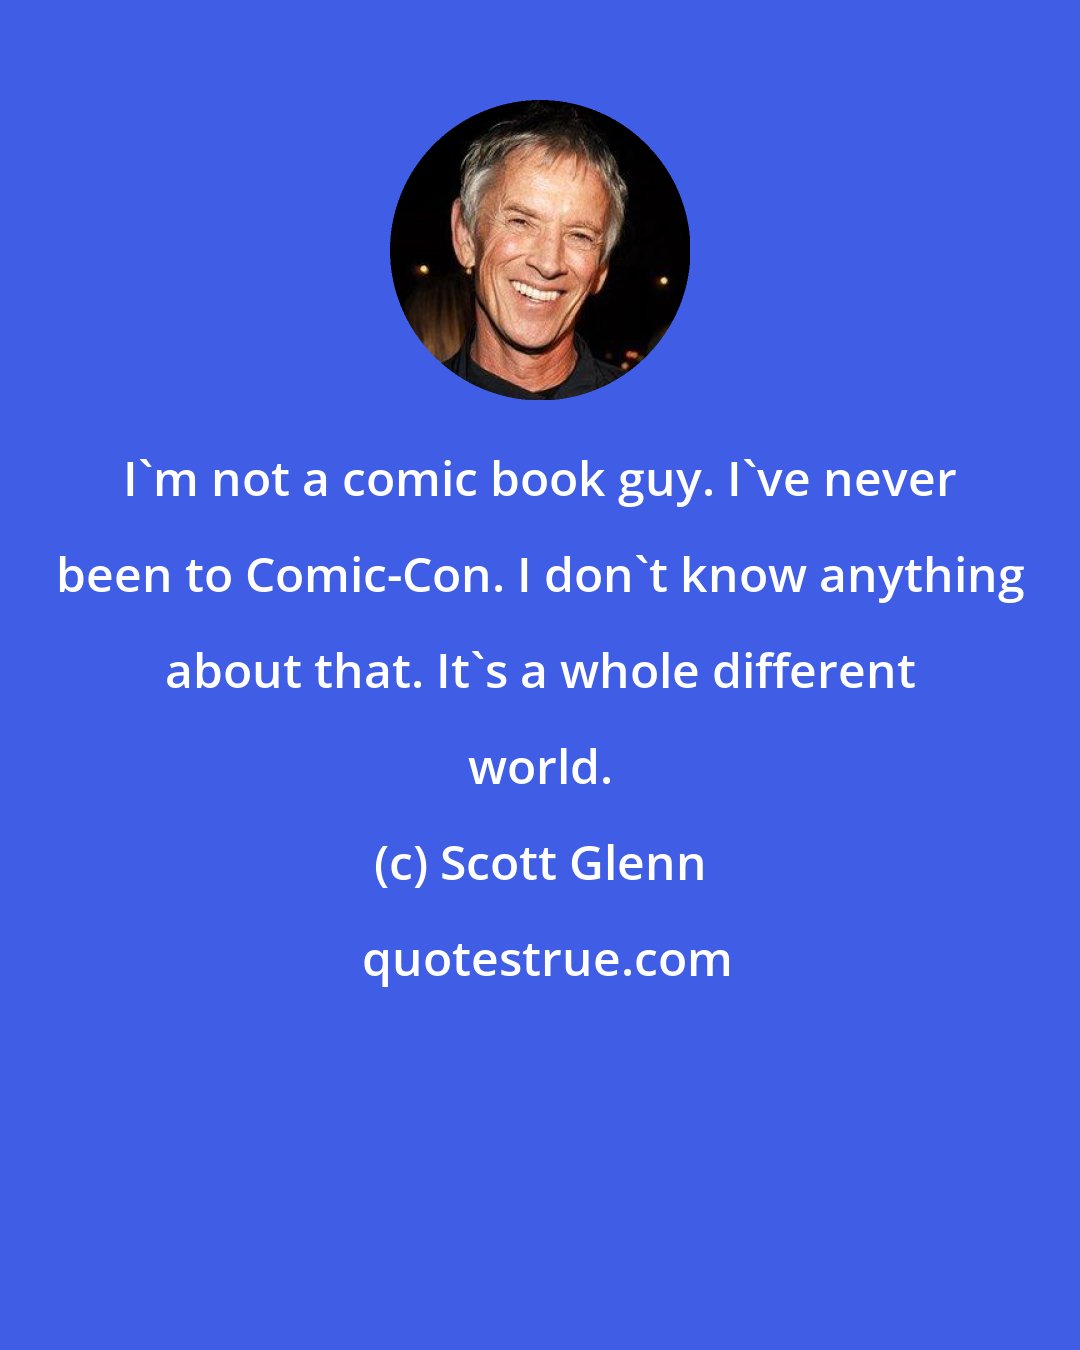 Scott Glenn: I'm not a comic book guy. I've never been to Comic-Con. I don't know anything about that. It's a whole different world.